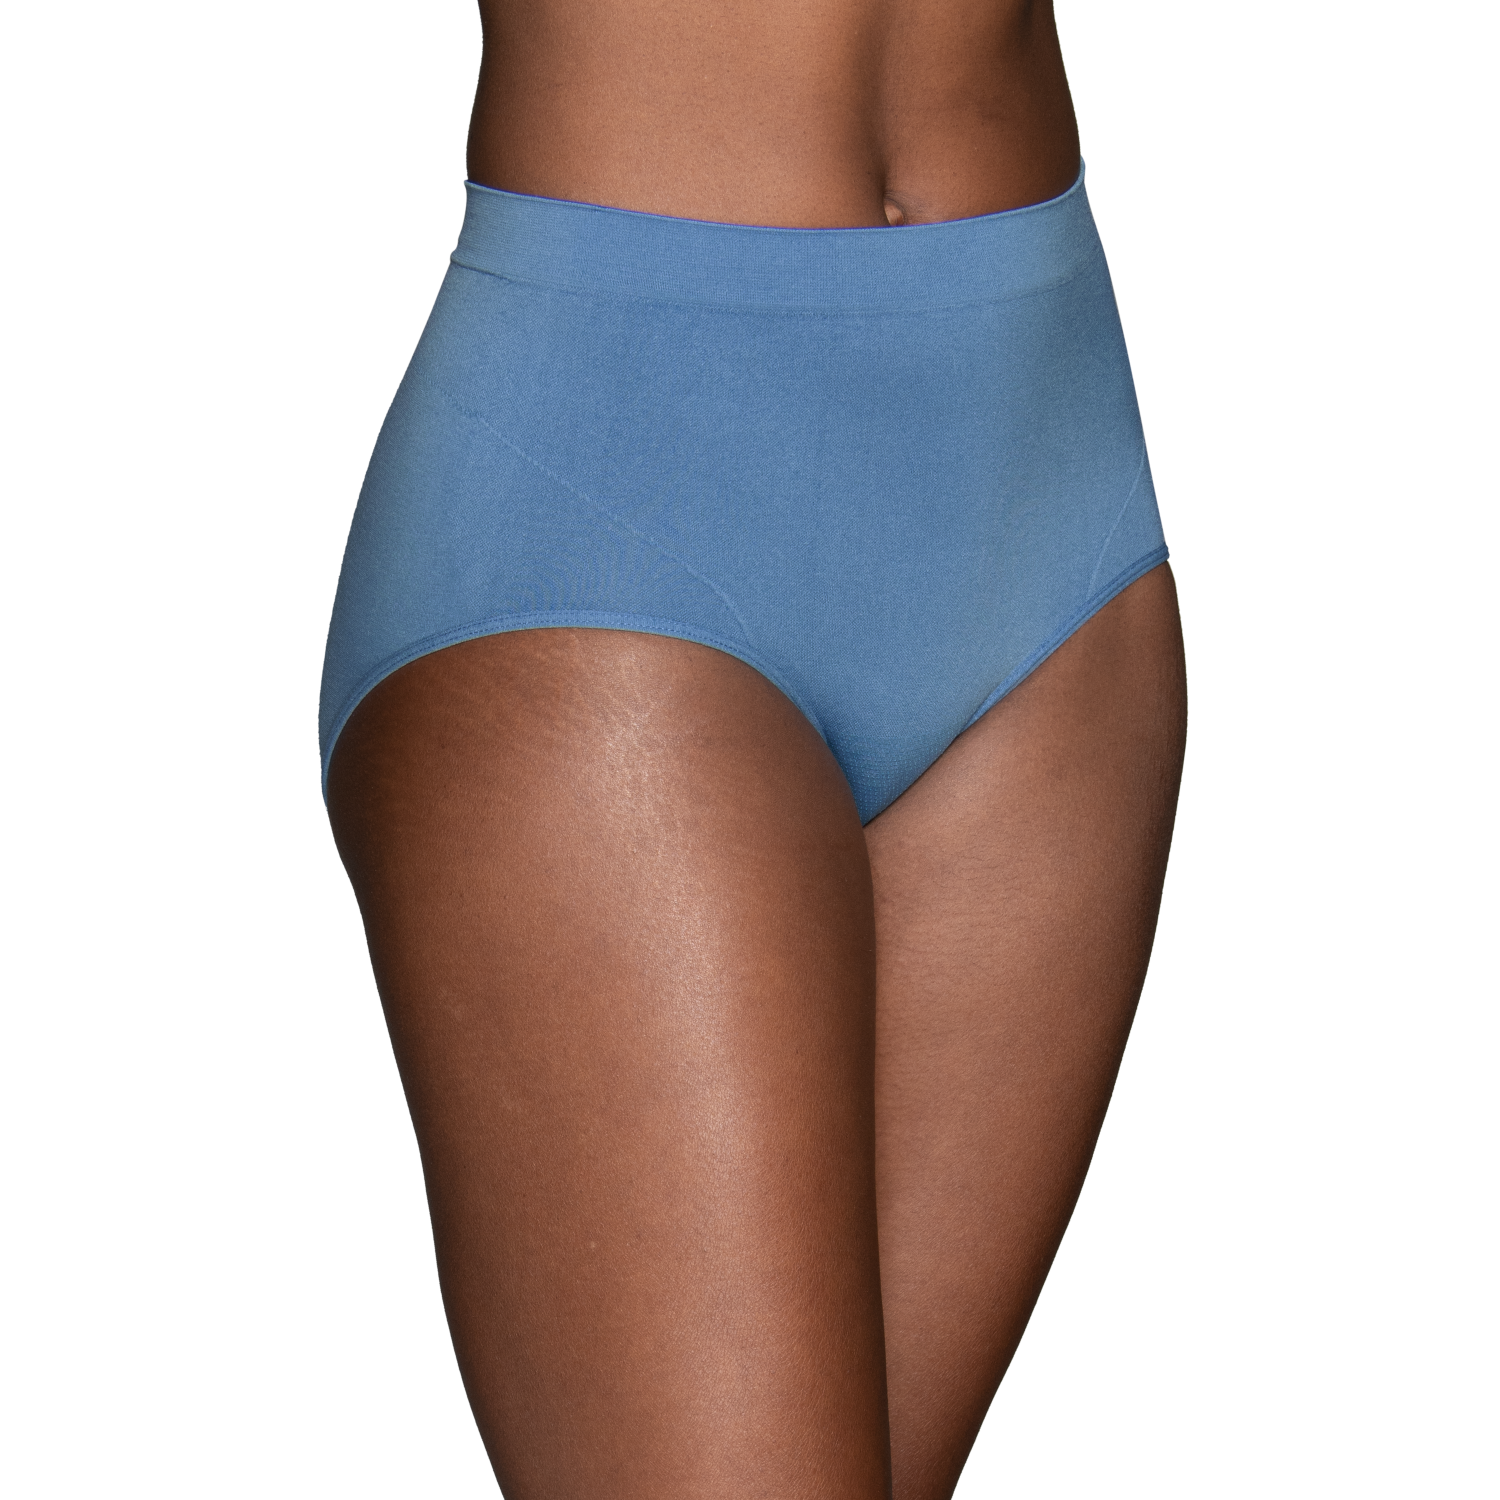 26 Best Pairs of Seamless Underwear for Women: No-Show Pairs